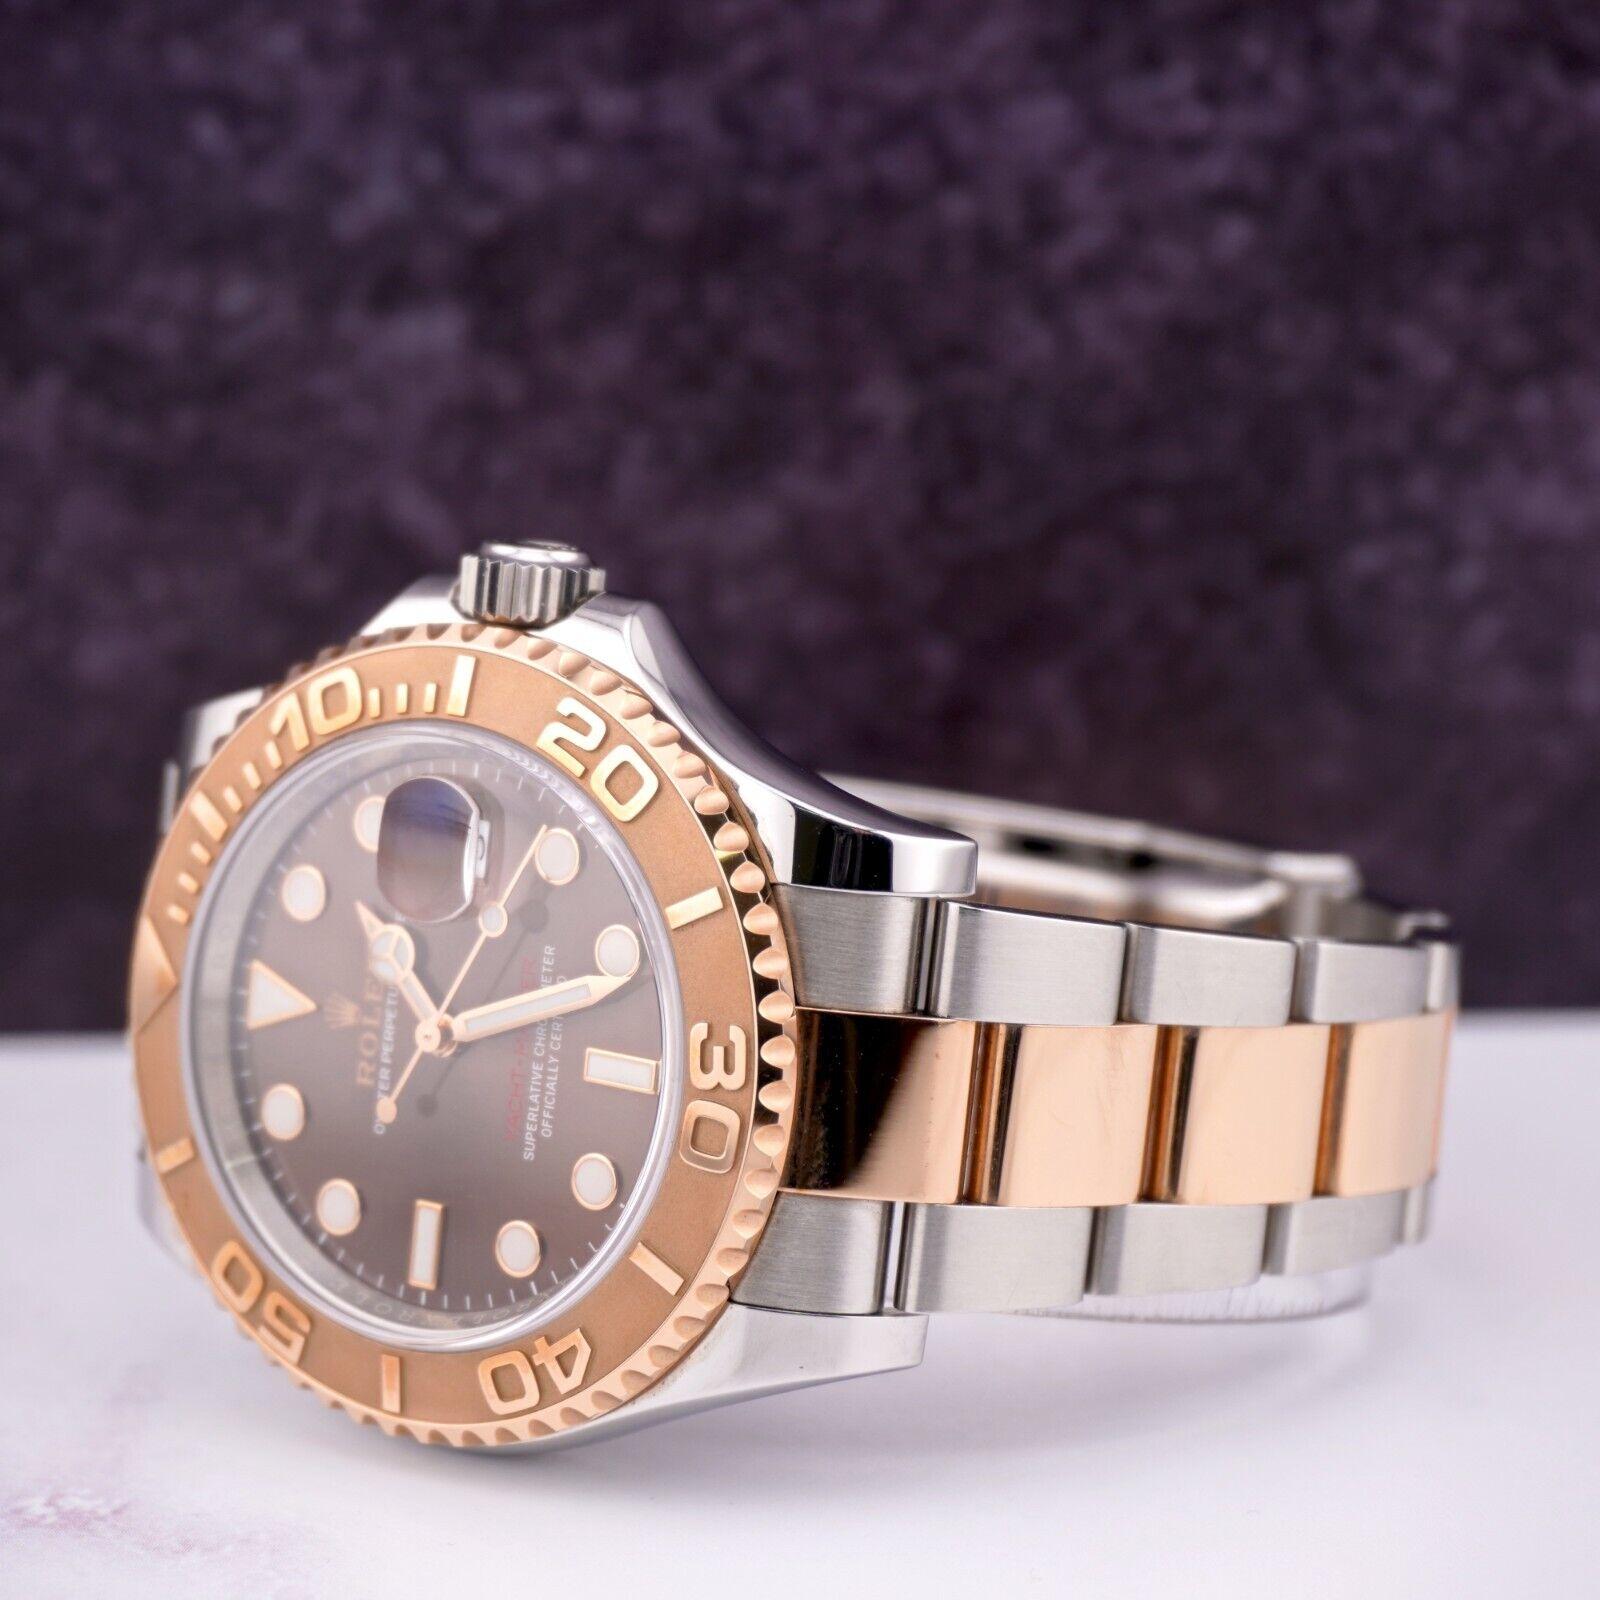 Rolex Yacht-Master 40mm Oyster 18k Rose Gold & Steel Watch Chocolate Dial 116621 For Sale 3